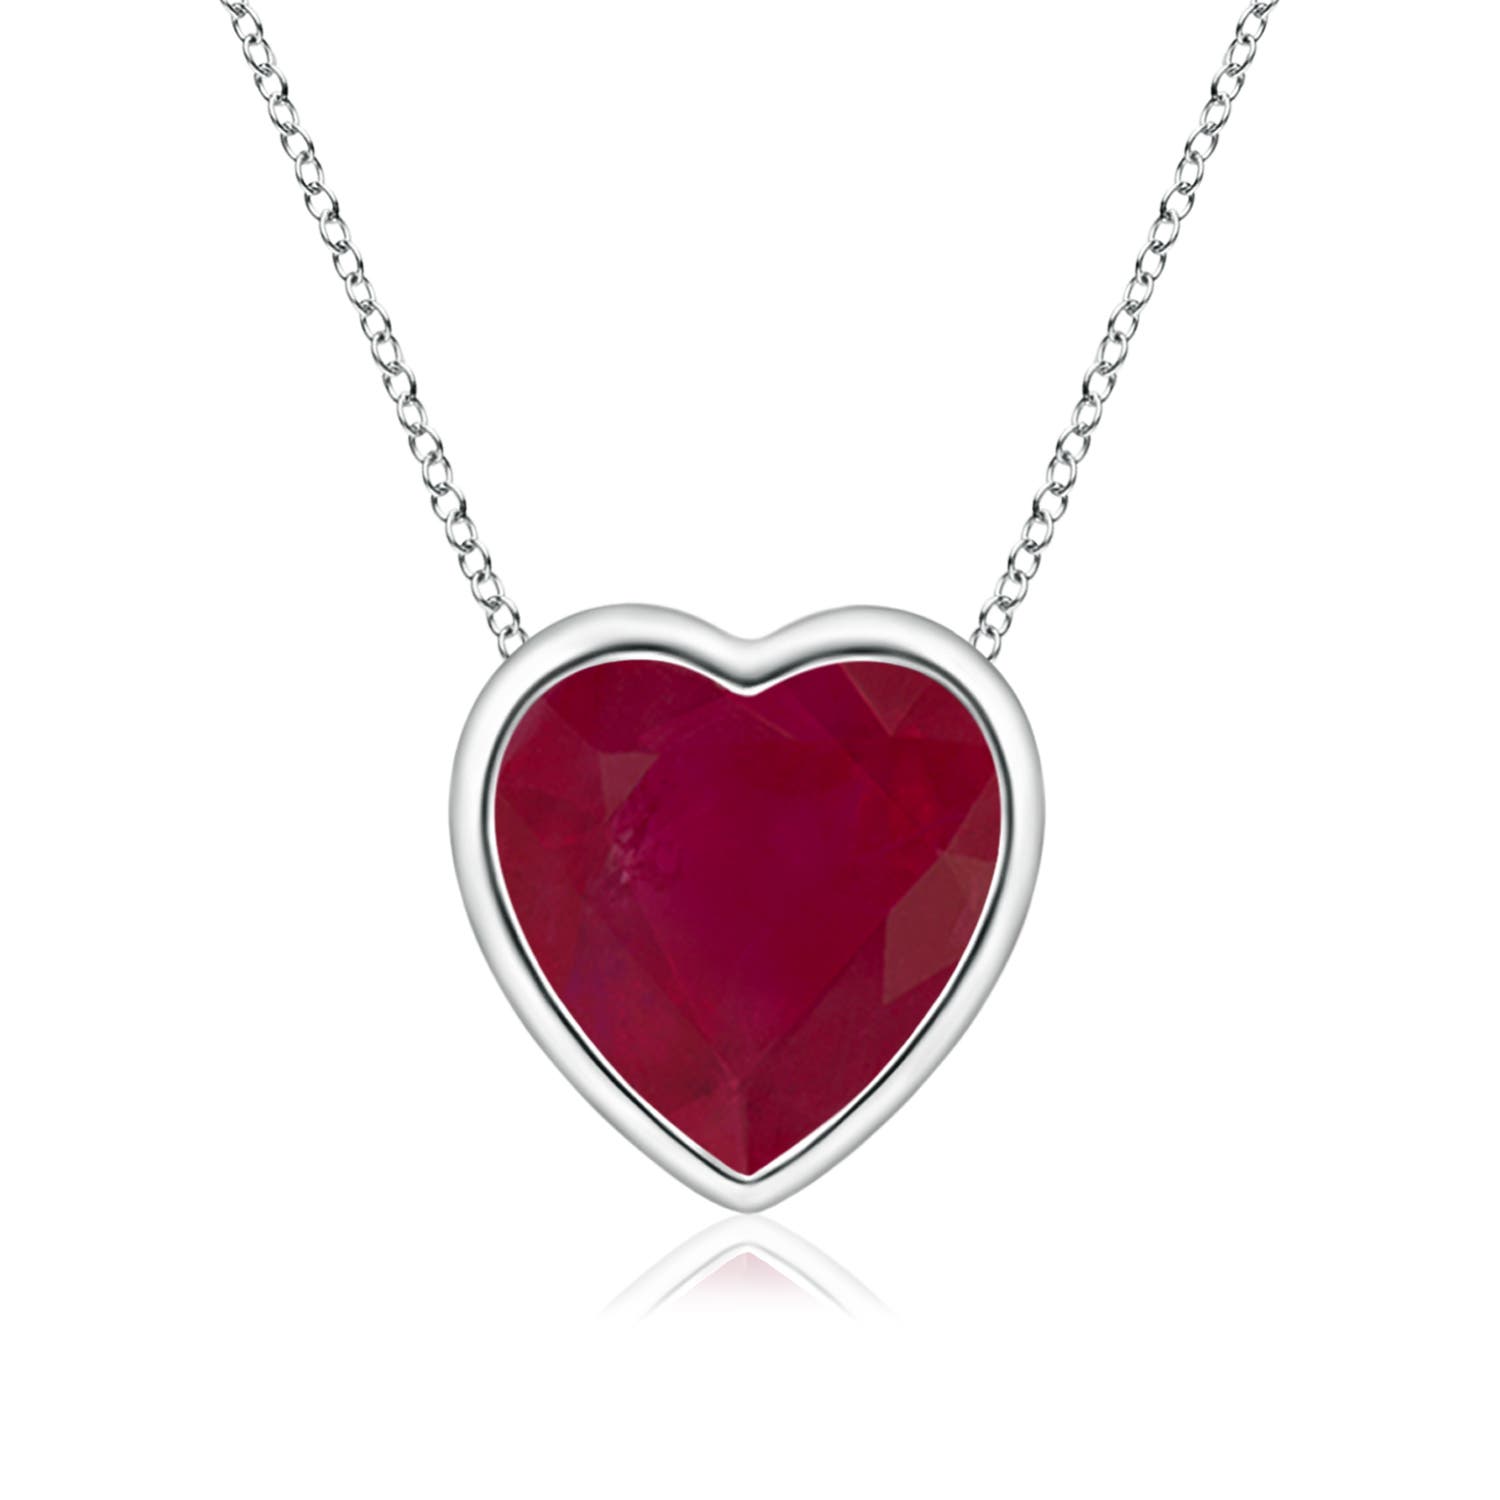 A - Ruby / 0.8 CT / 14 KT White Gold